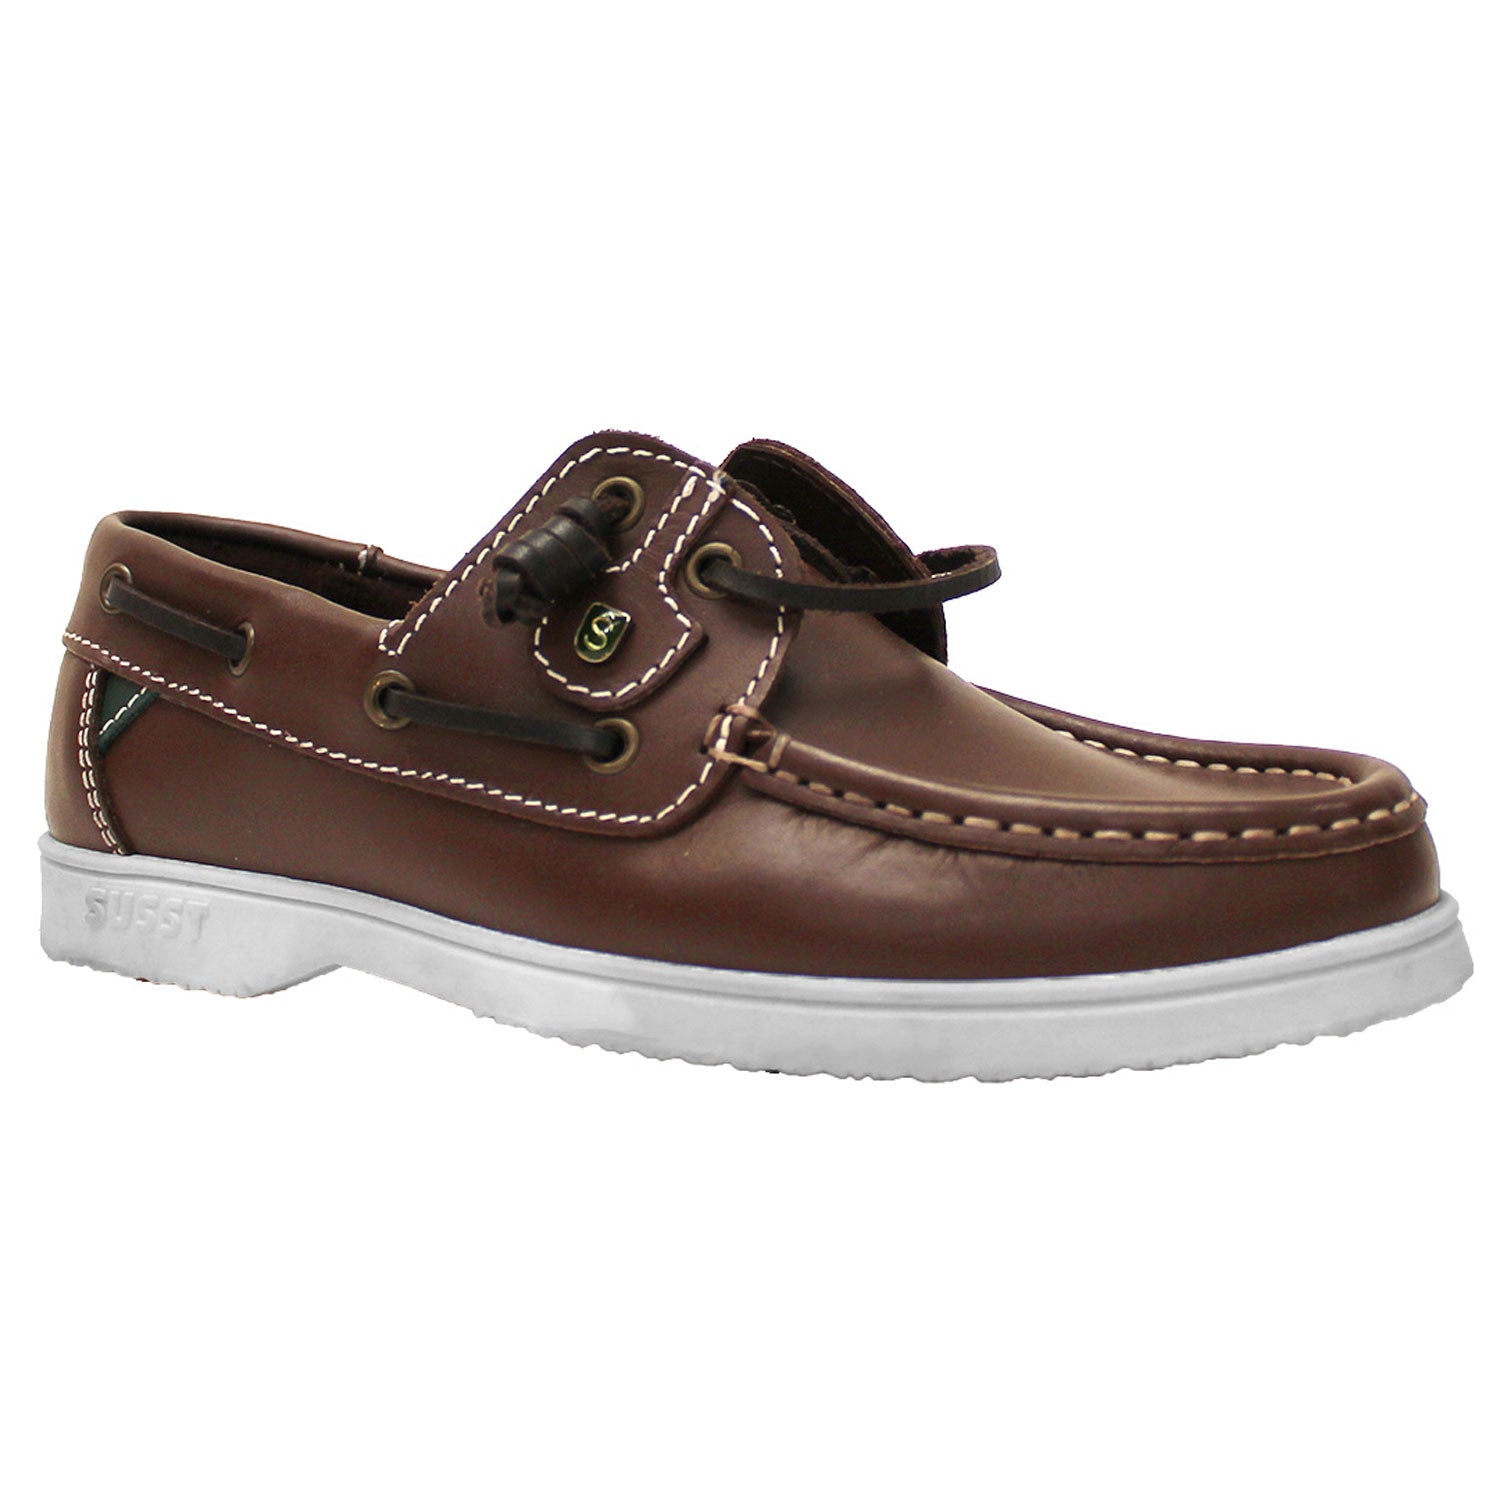 Susst Gaby Deck Shoe - Brown 1 Shaws Department Stores